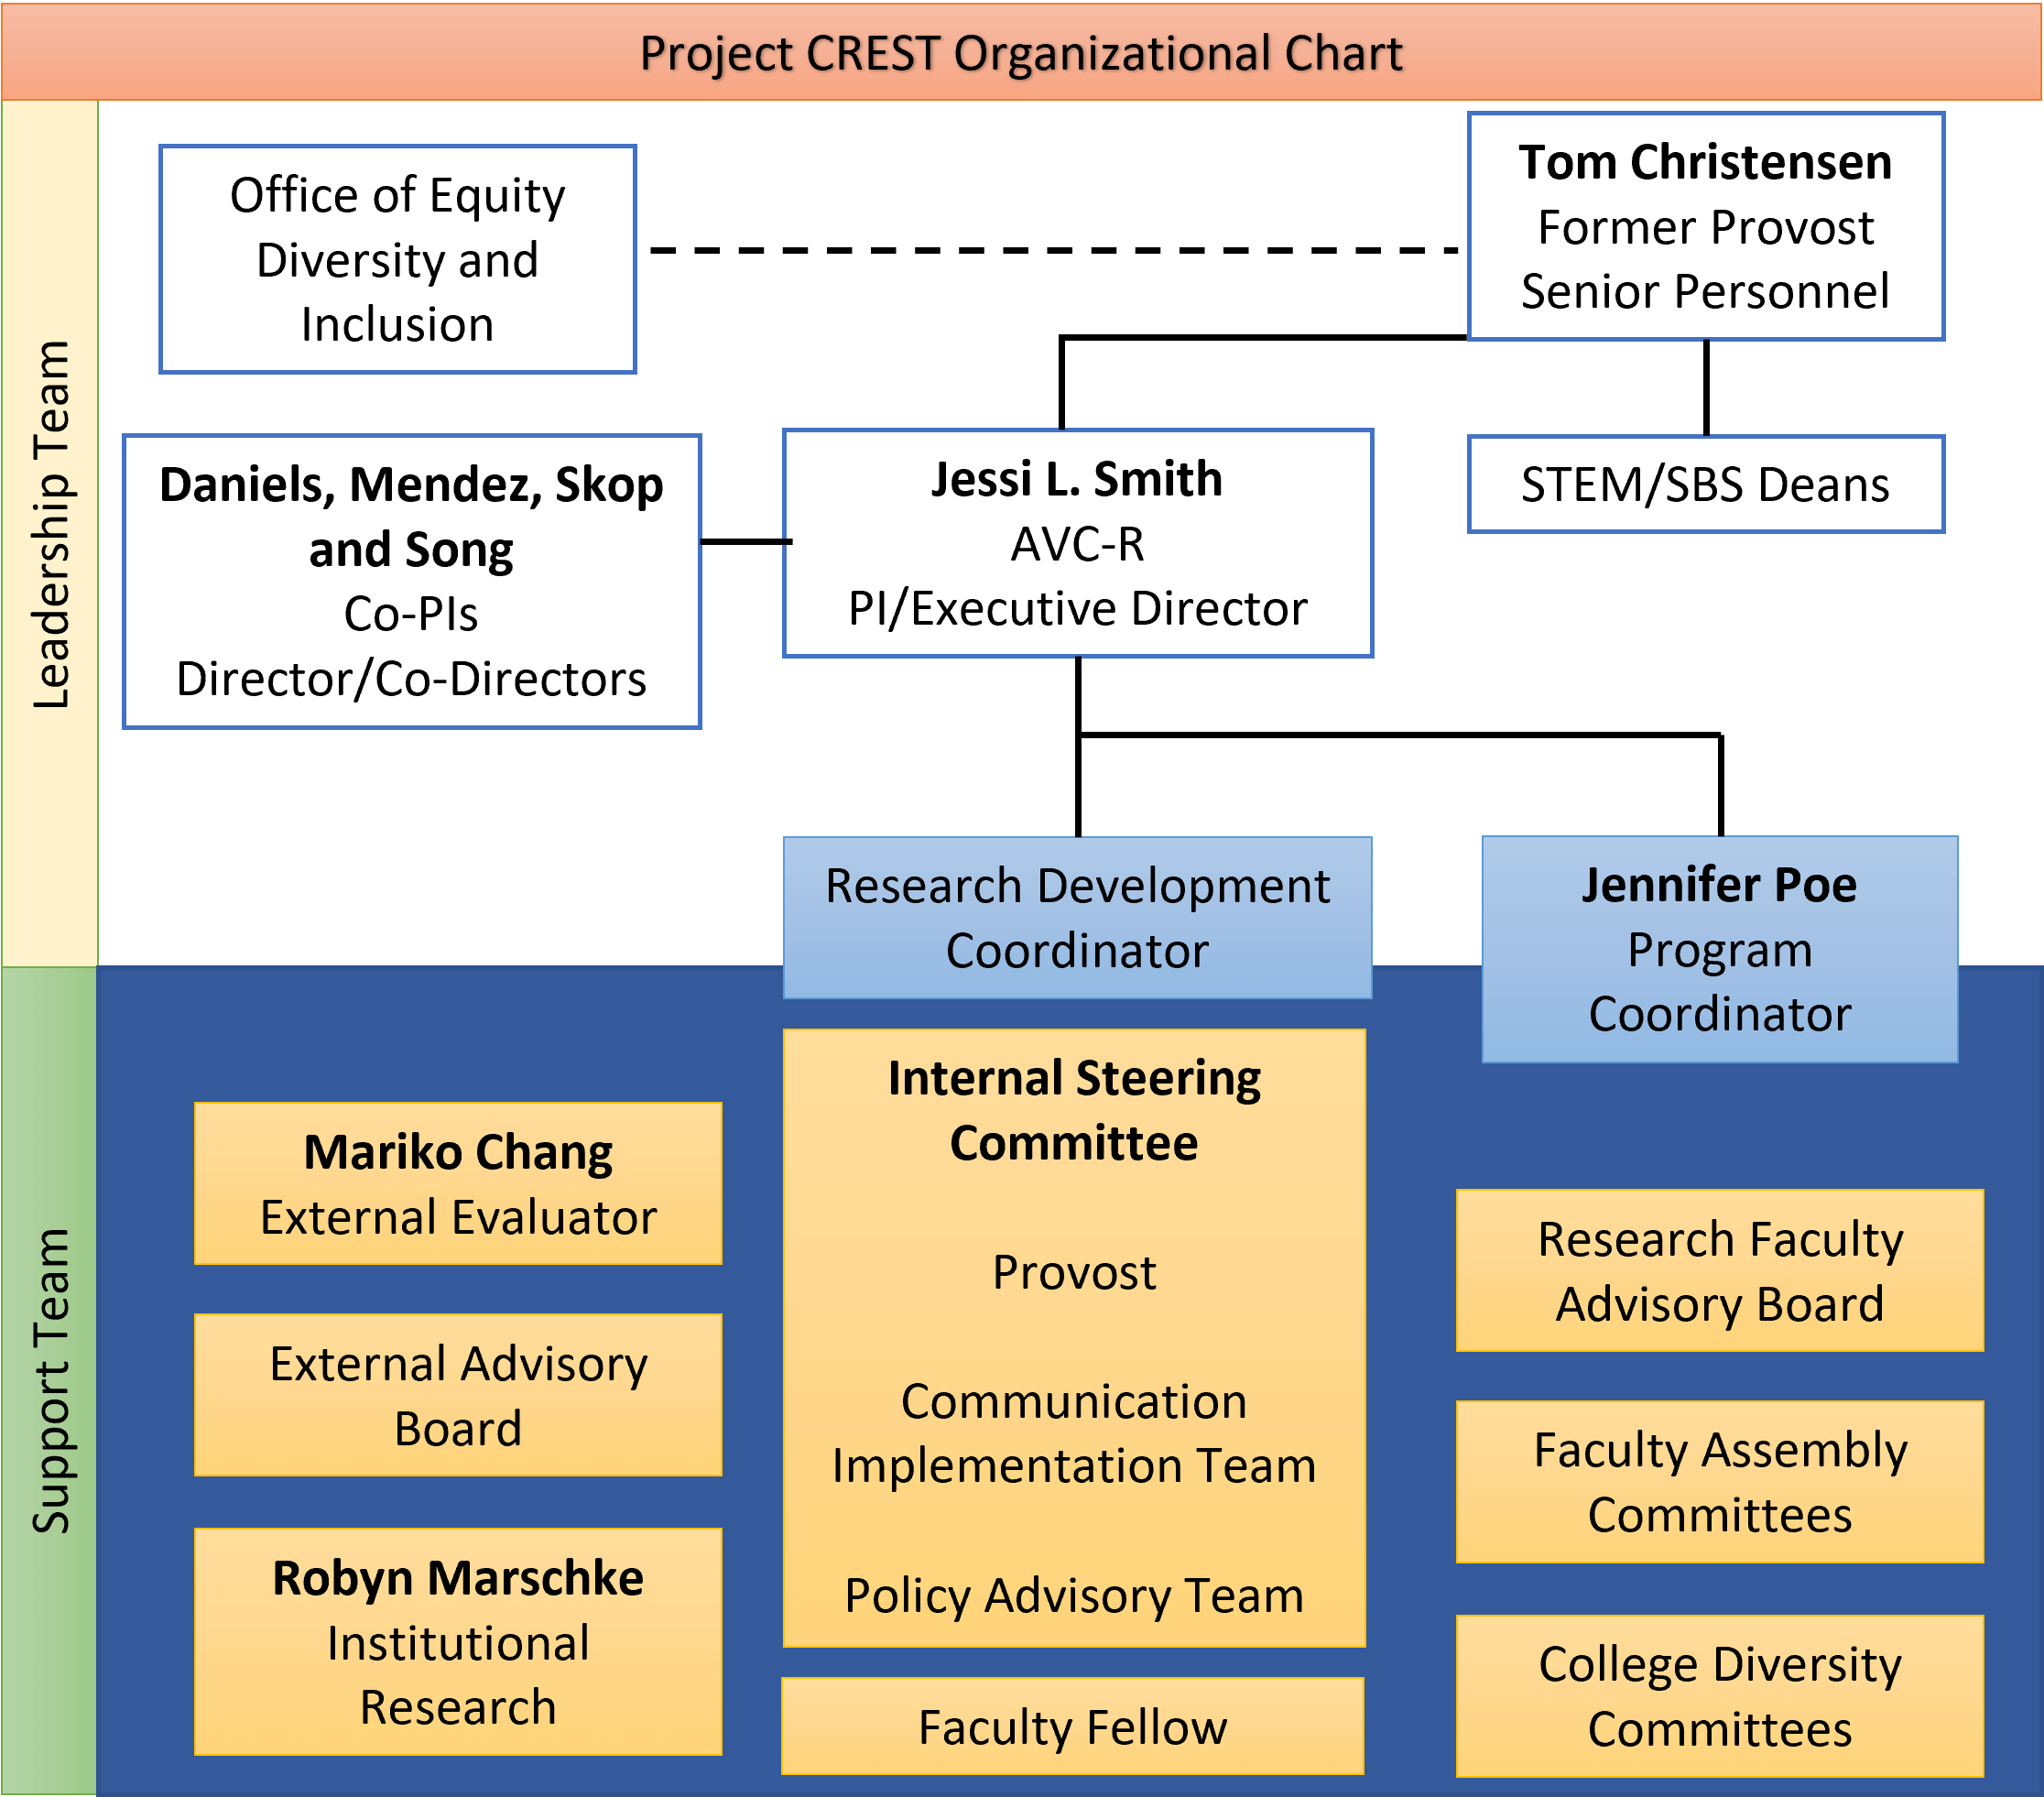 Organizational Chart for Project CREST